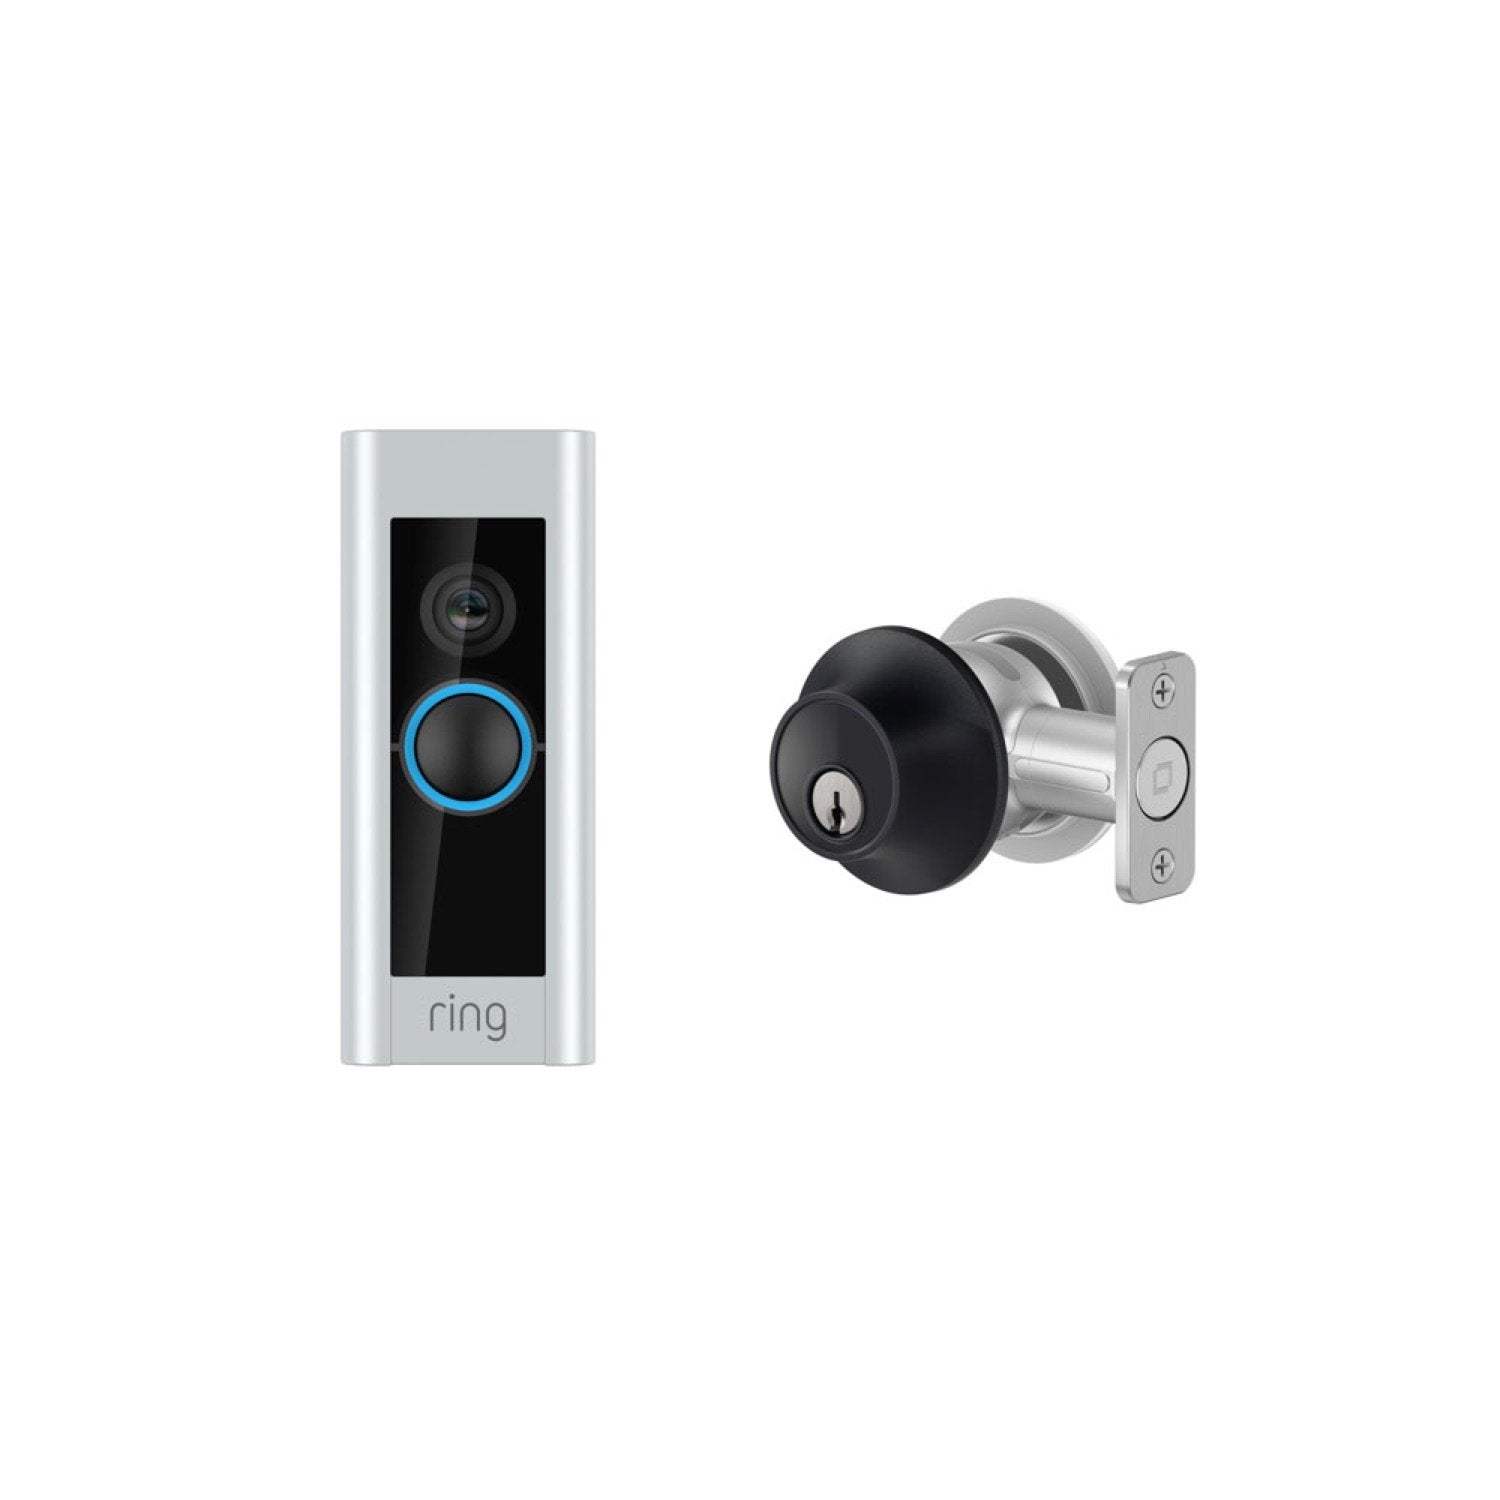 Wired Doorbell Plus (Video Doorbell Pro) and Level Lock - Touch Edition - Matte Black